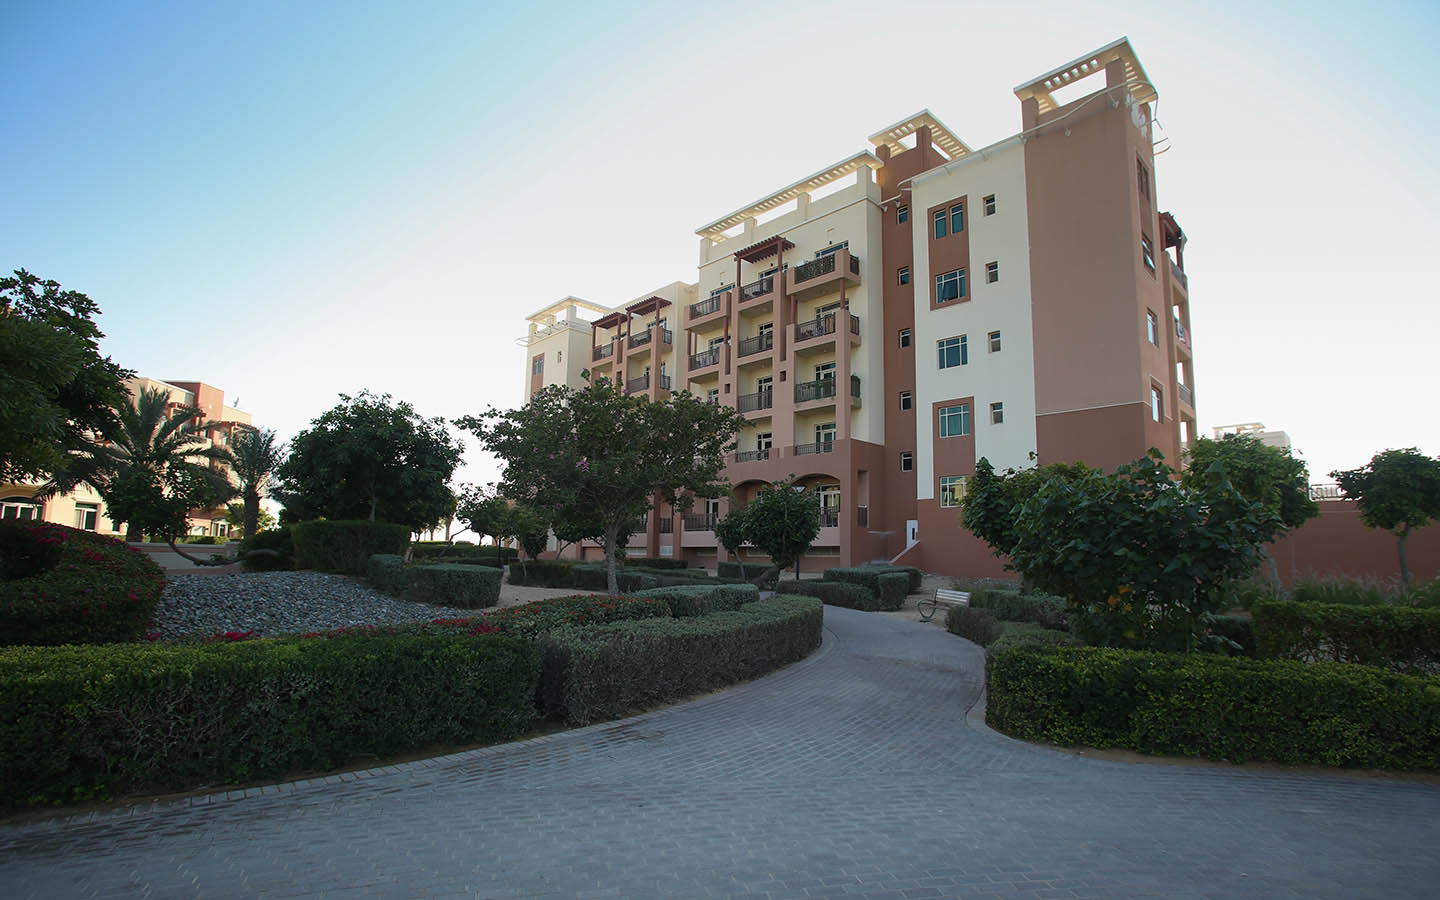 al ghadeer is among the top areas for buying studio apartments in abu dhabi